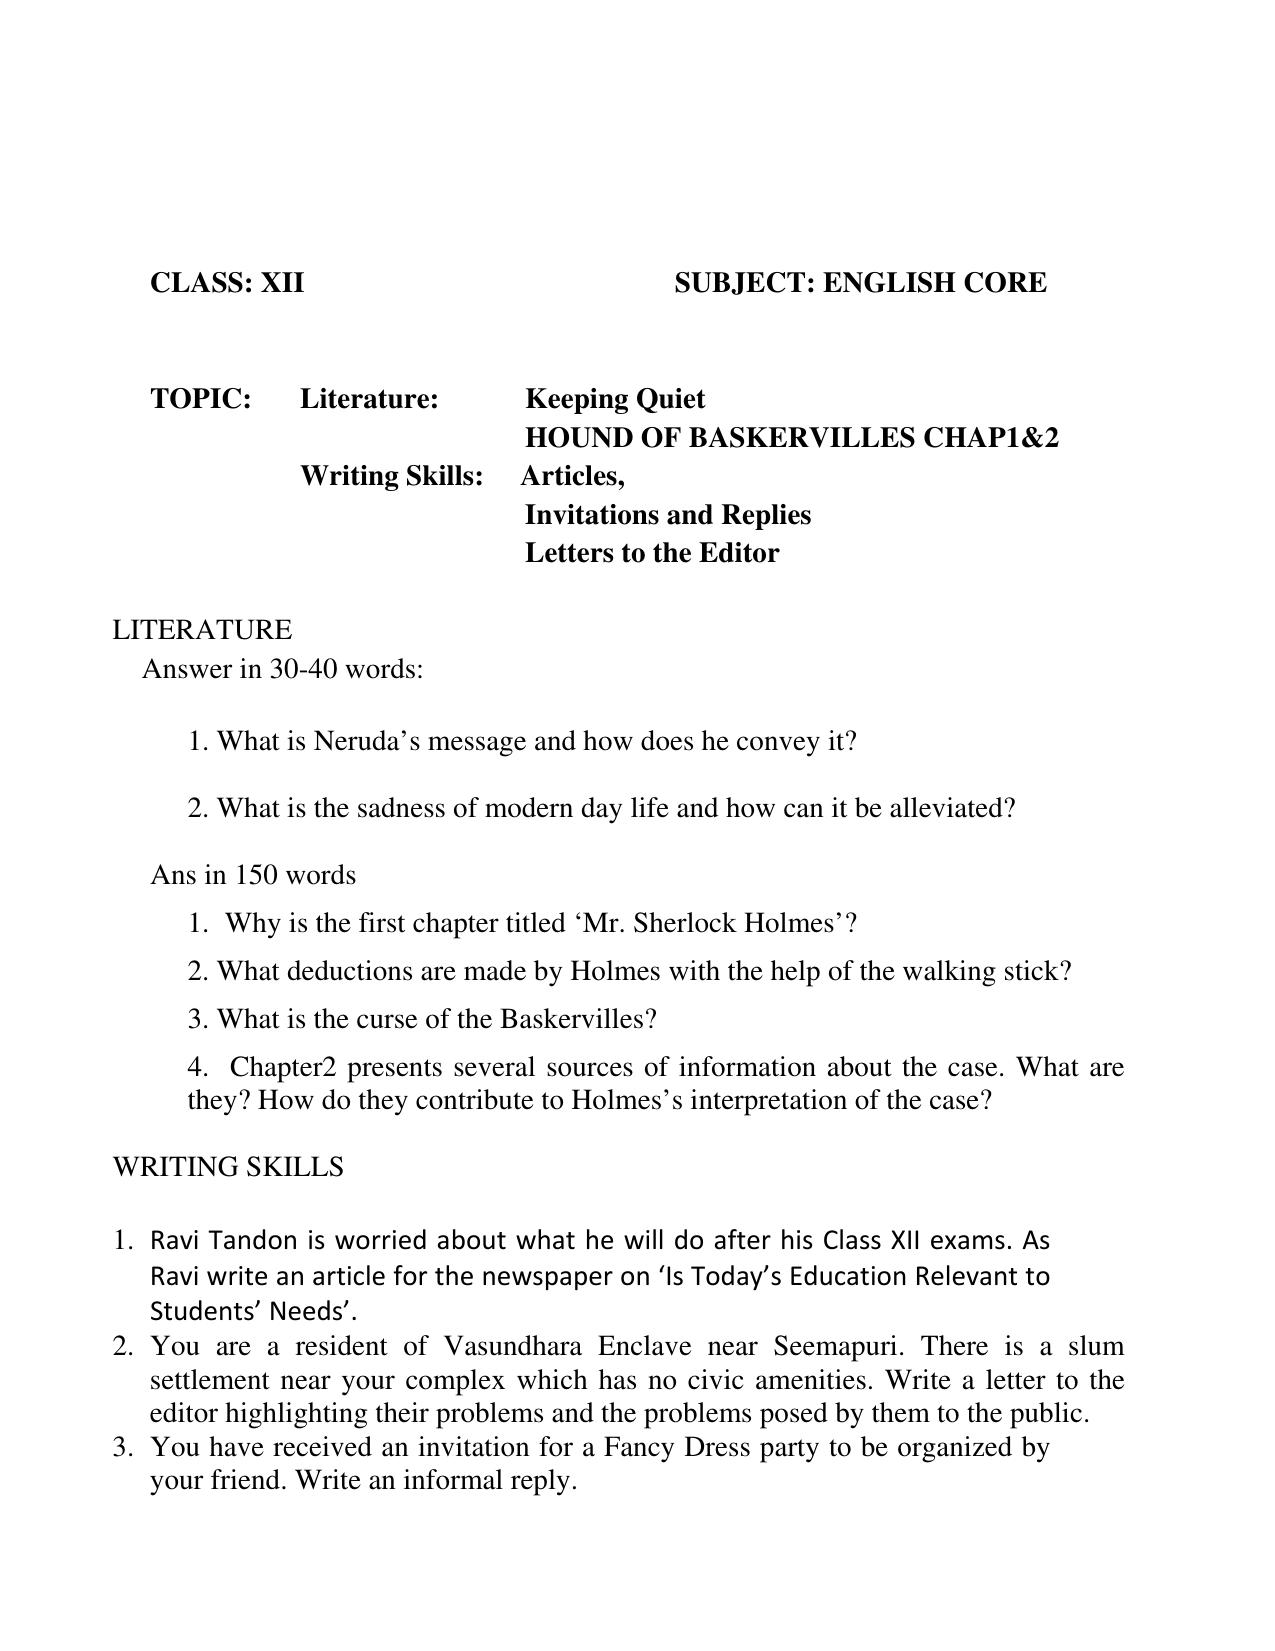 CBSE Class 12 English Core Assignment 3 - Page 1